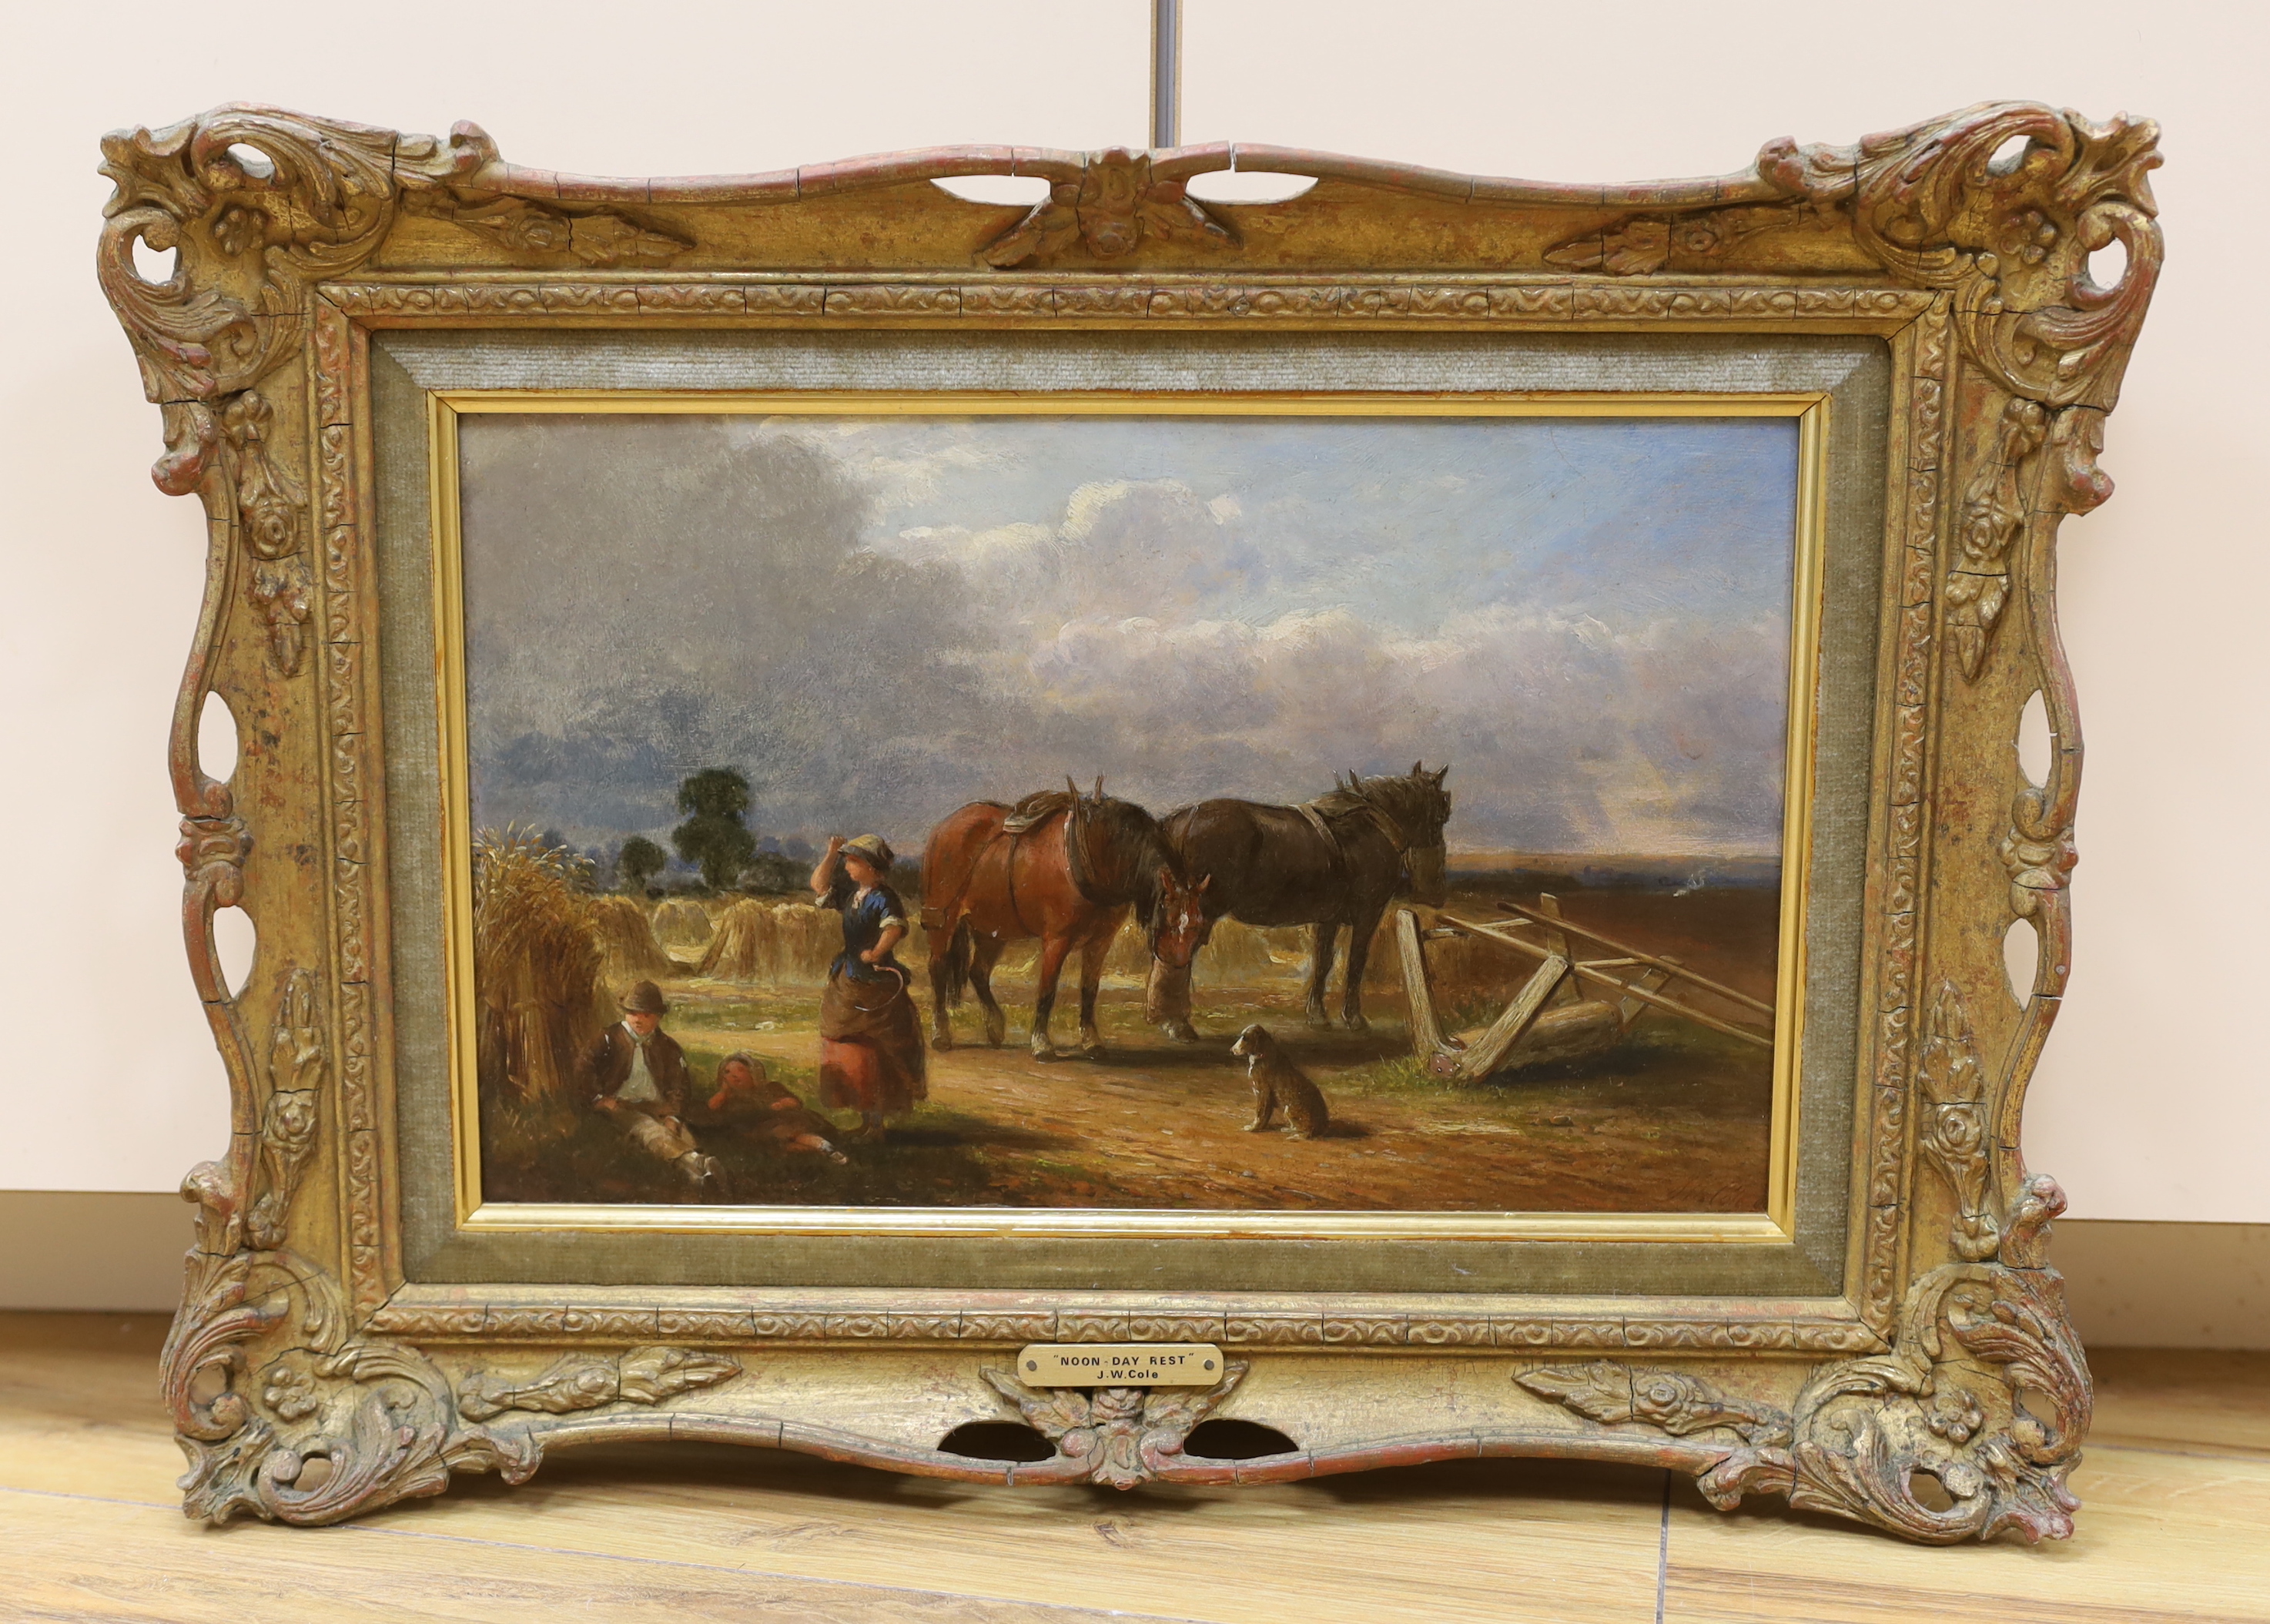 James William Cole (act. 1830–1882), oil on board, ‘Noon Day Rest’, signed and dated 1860, applied plaque to the frame, 20 x 32cm